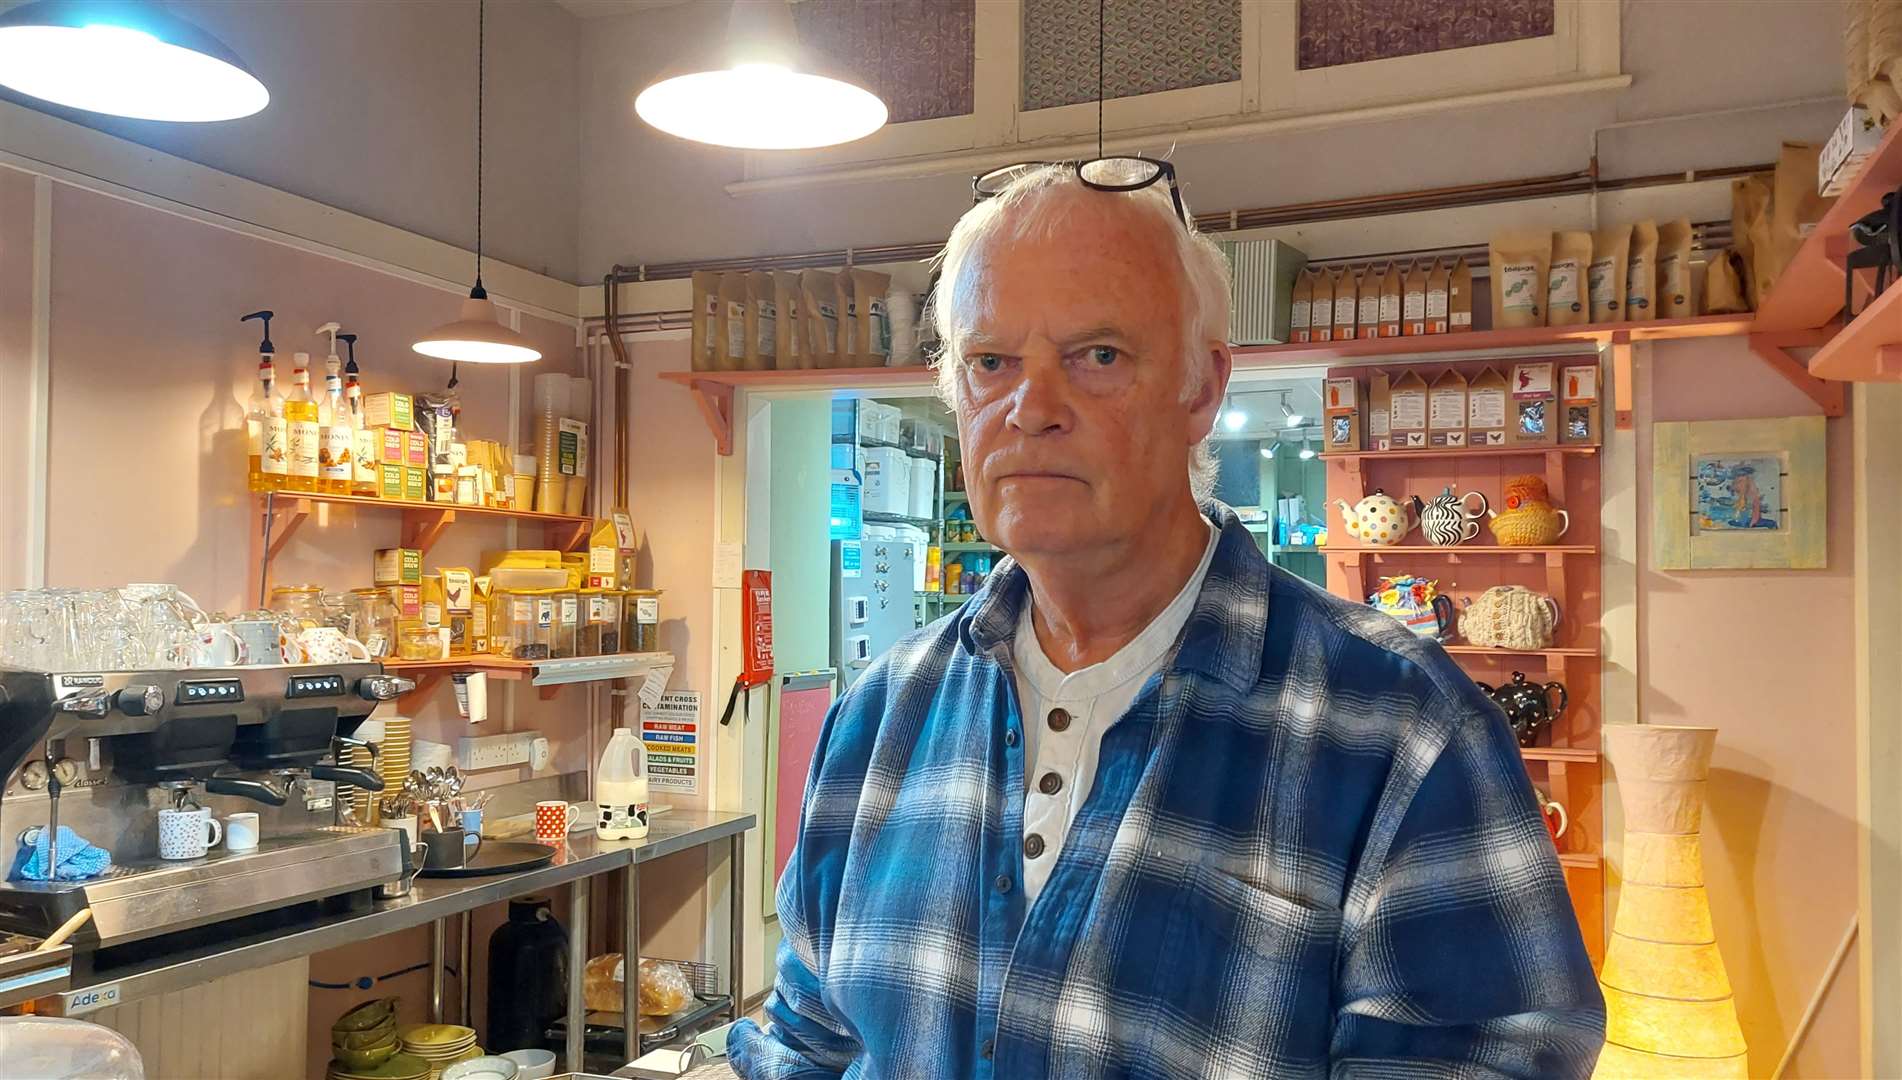 David Watson, owner of The Dog House coffee shop in Sandgate